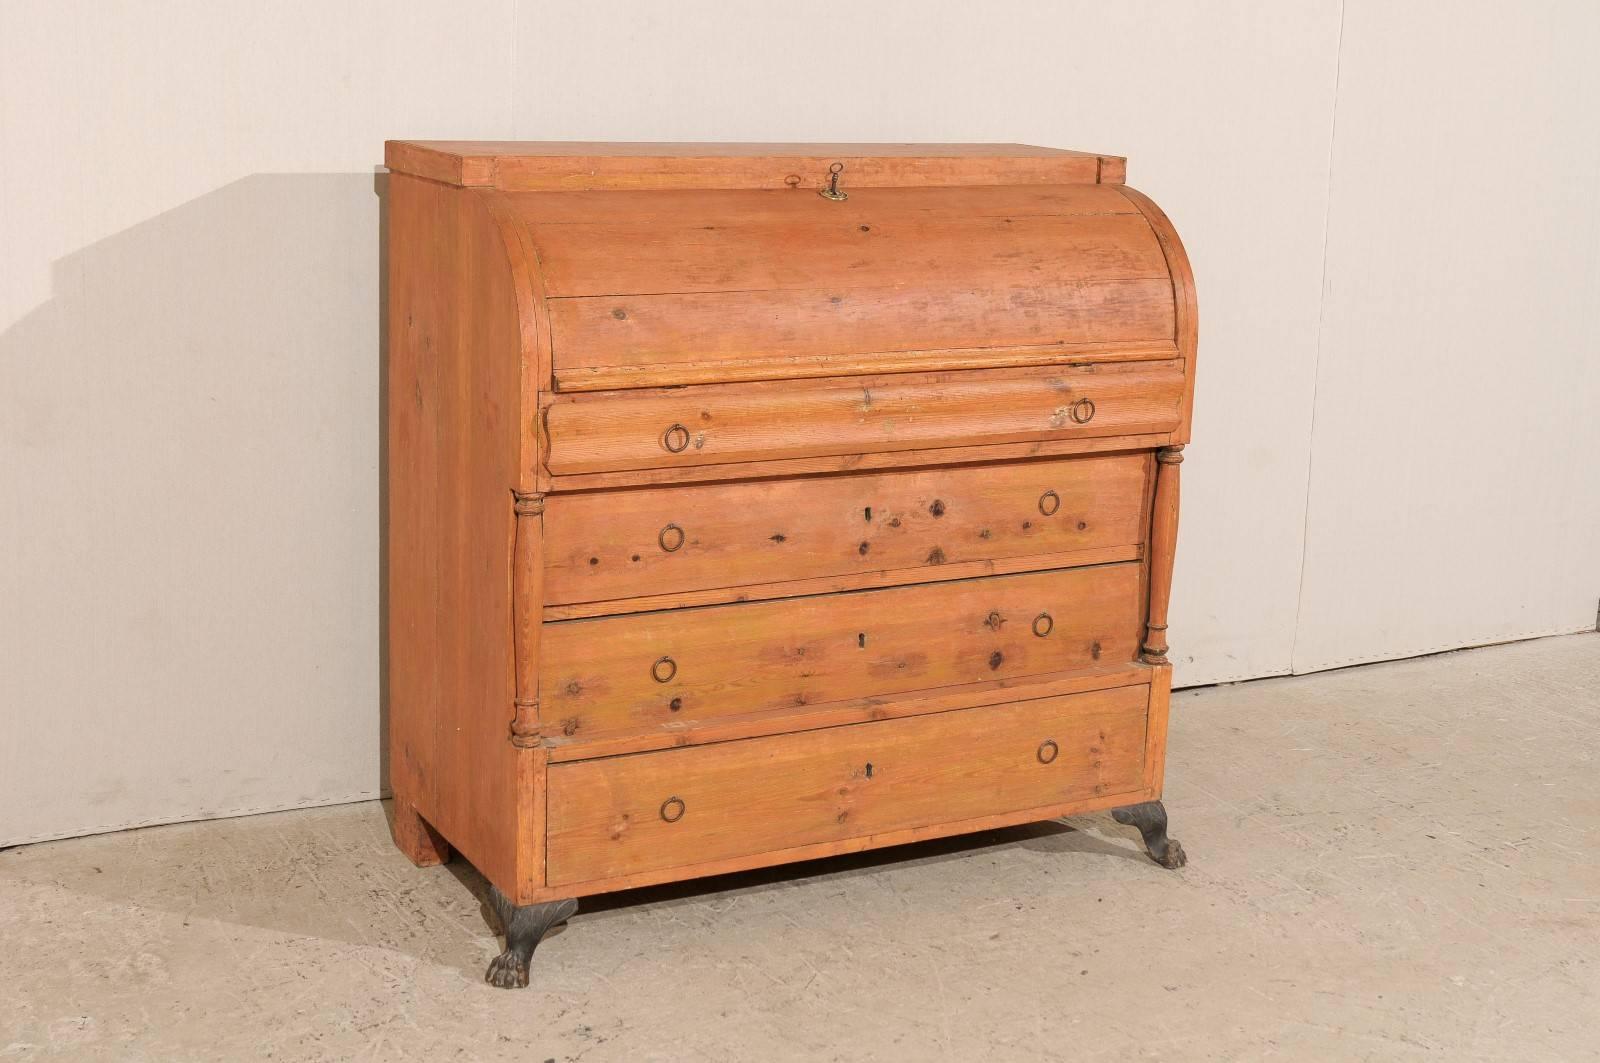 Painted Swedish Mid-19th Century Chest with Convex Drop Front and Inner Drawers For Sale